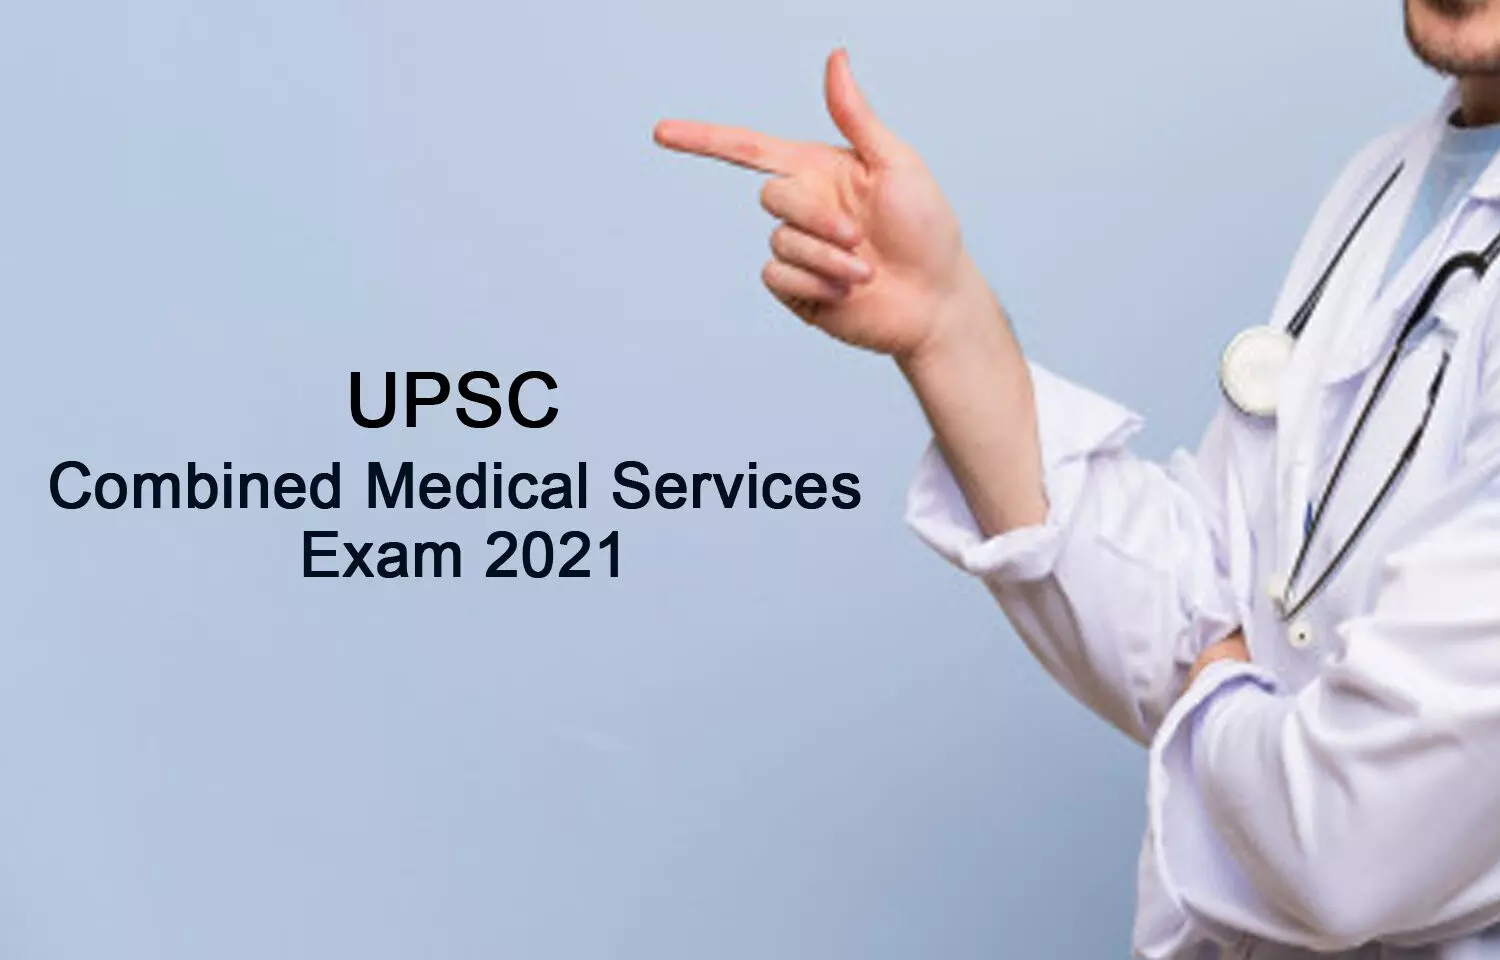 UPSC releases schedule of Combined Medical Services Examination 2021